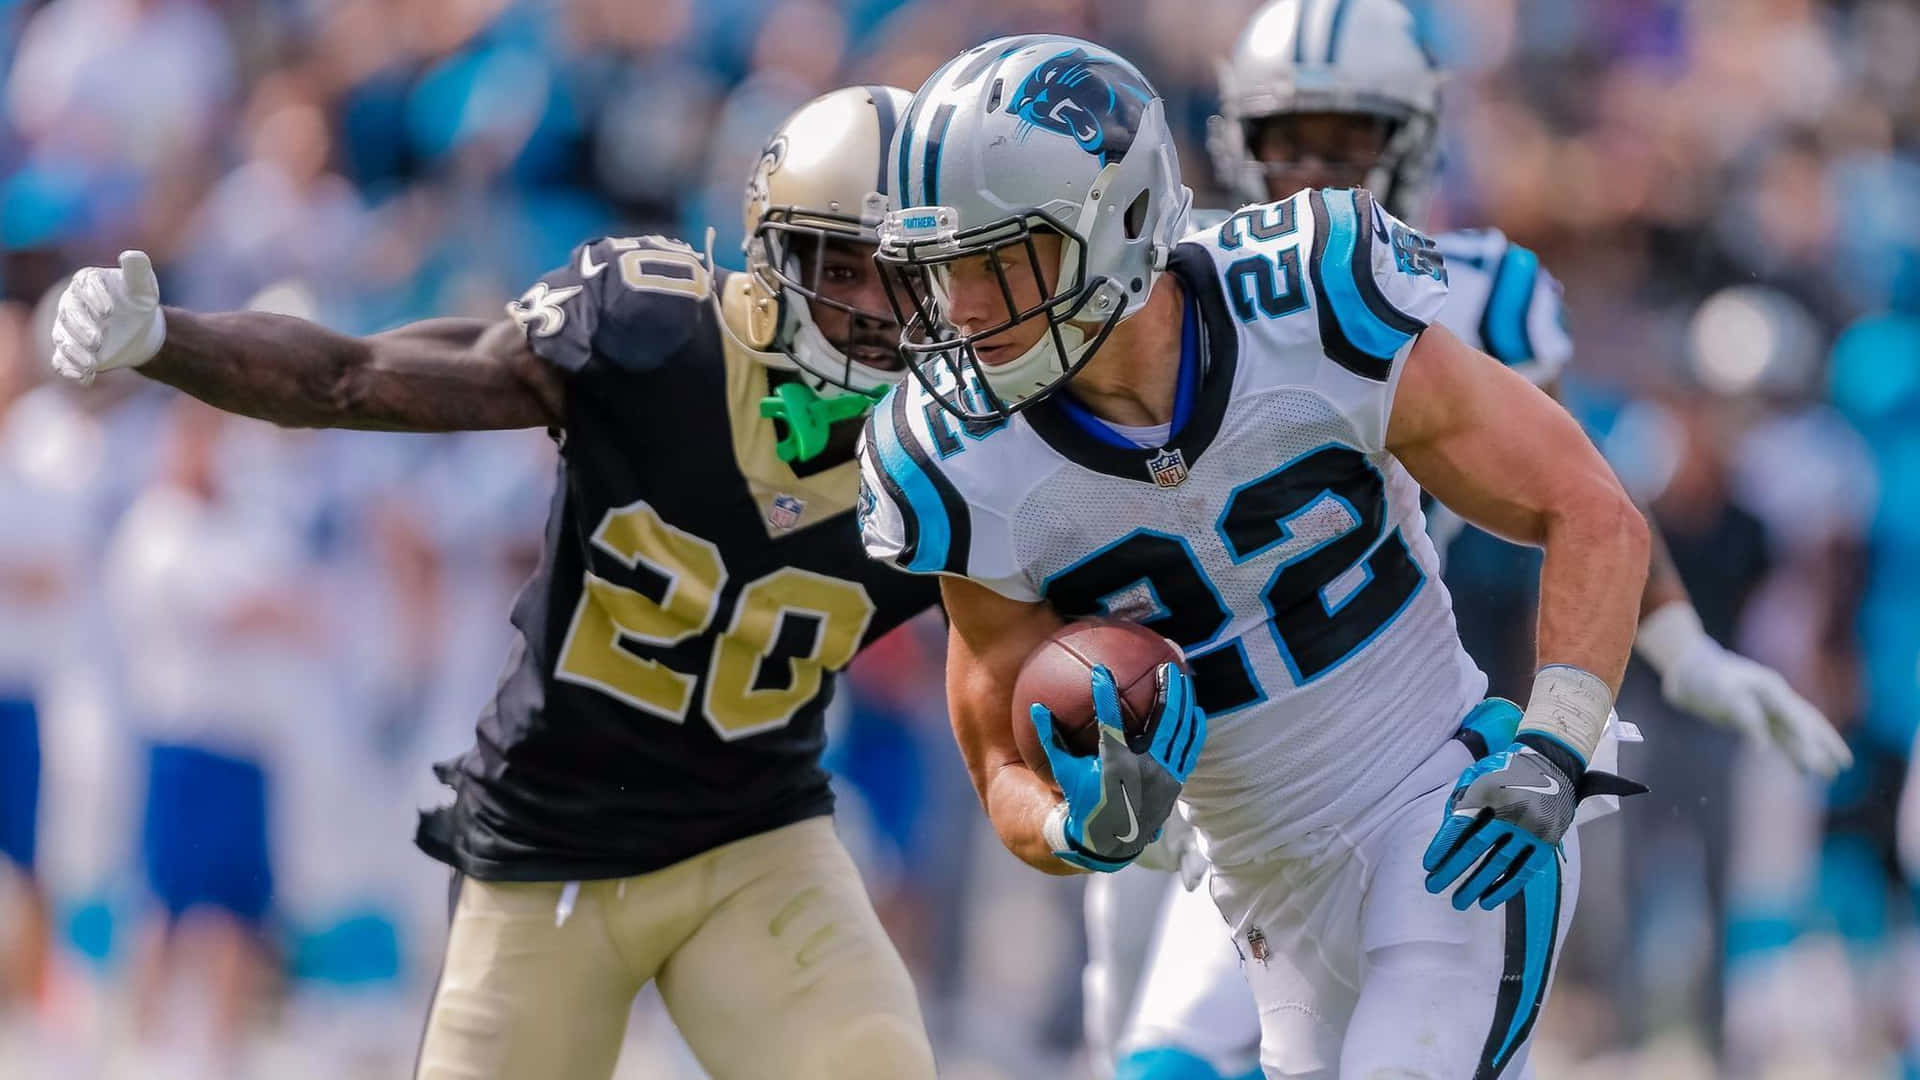 Christian Mccaffrey of the Carolina Panthers at Soldier Field Wallpaper